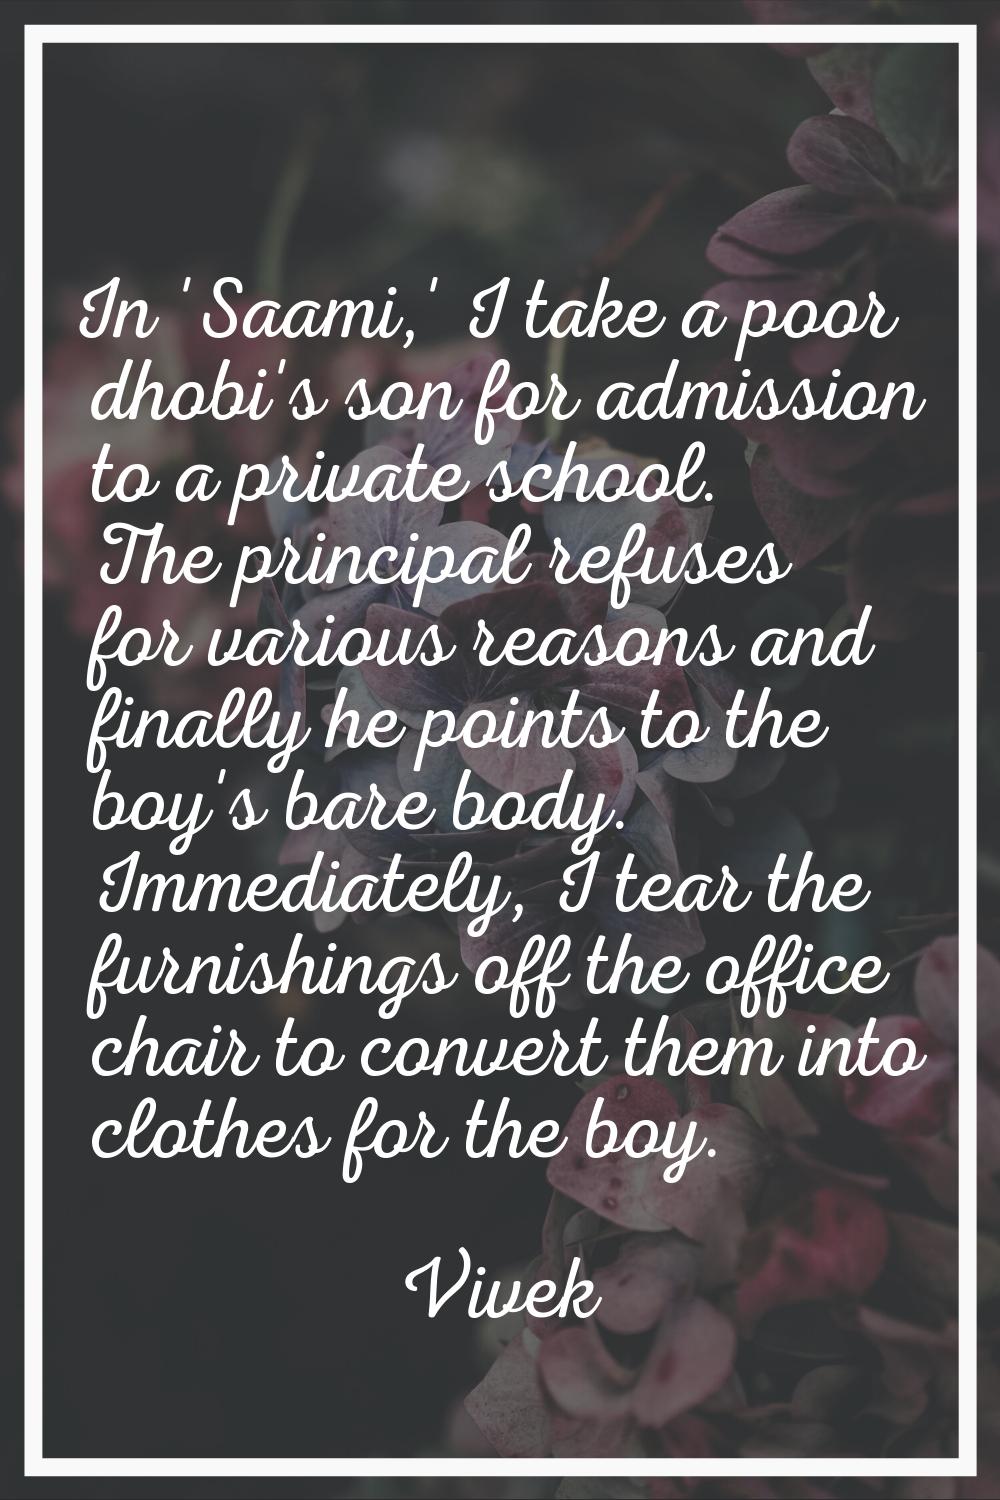 In 'Saami,' I take a poor dhobi's son for admission to a private school. The principal refuses for 